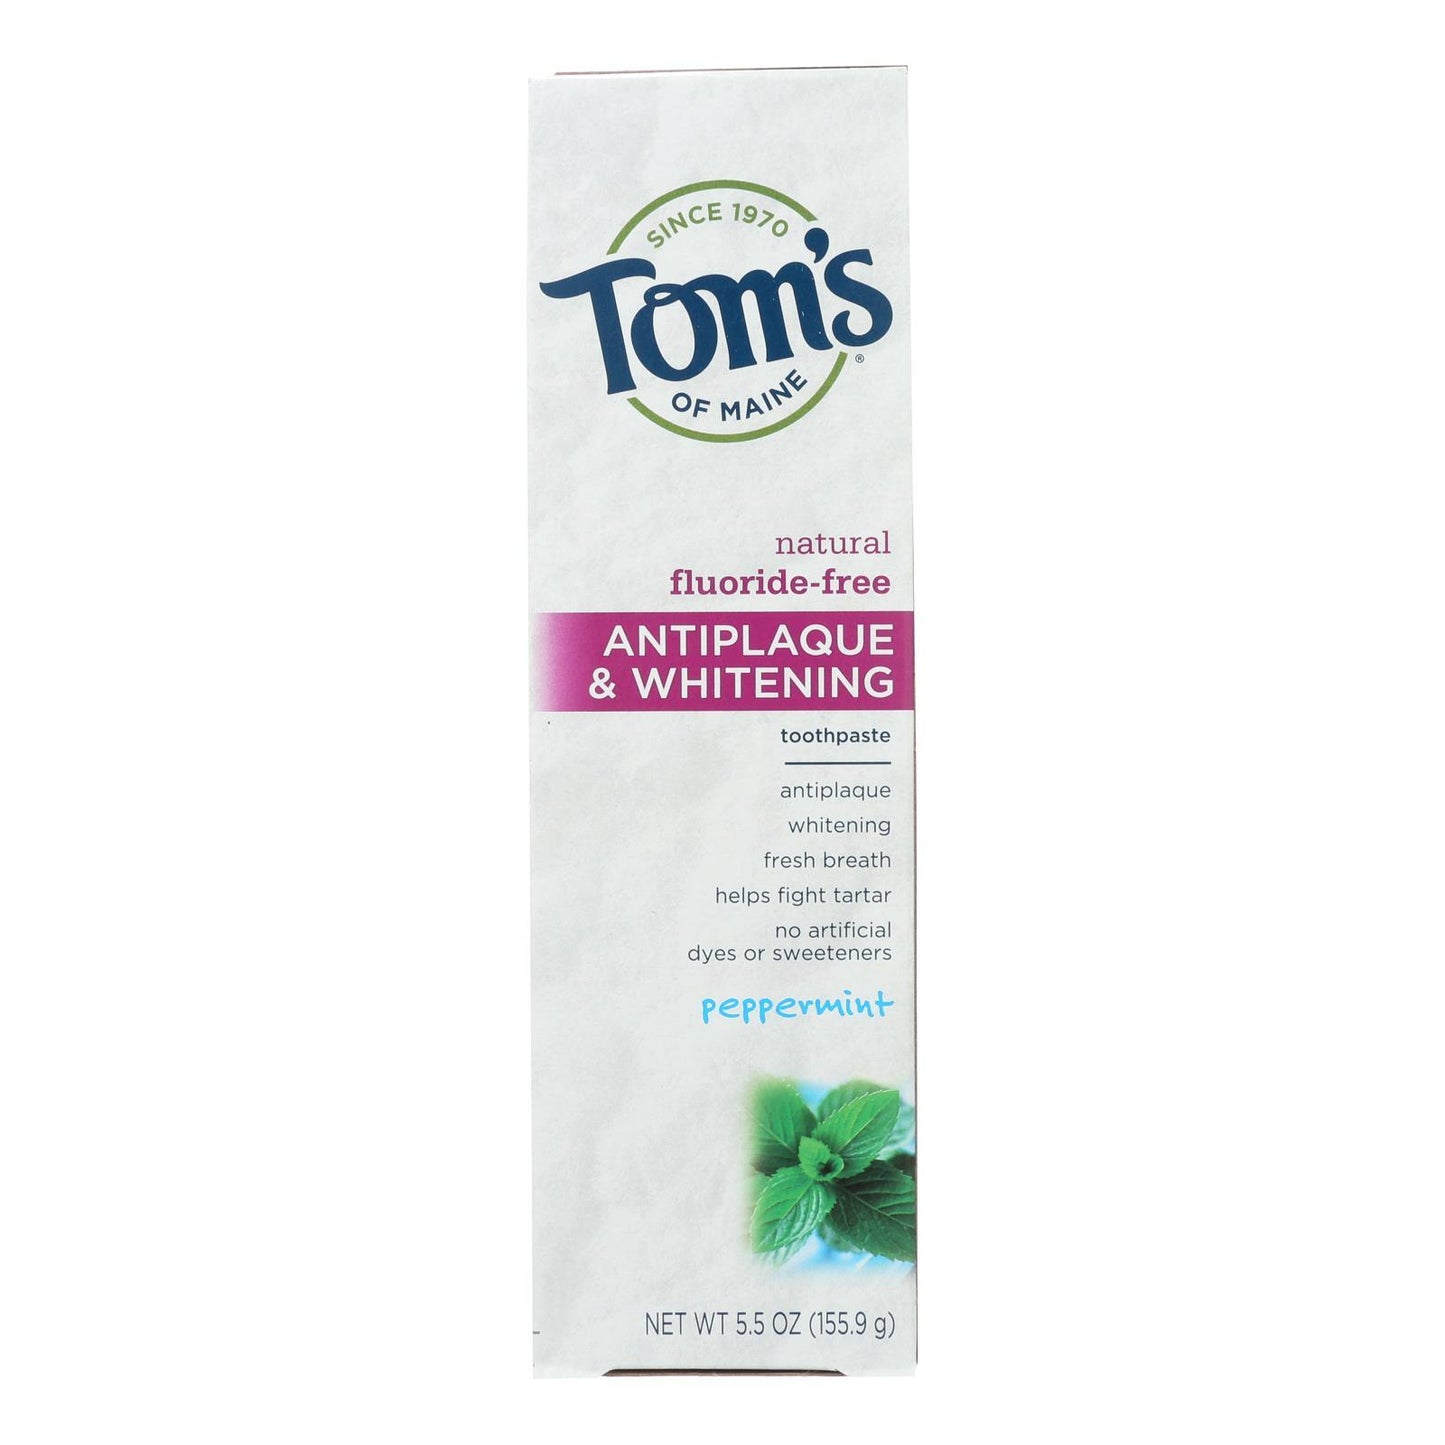 Tom's Of Maine Antiplaque And Whitening Toothpaste Peppermint - 5.5 Oz - Case Of 6